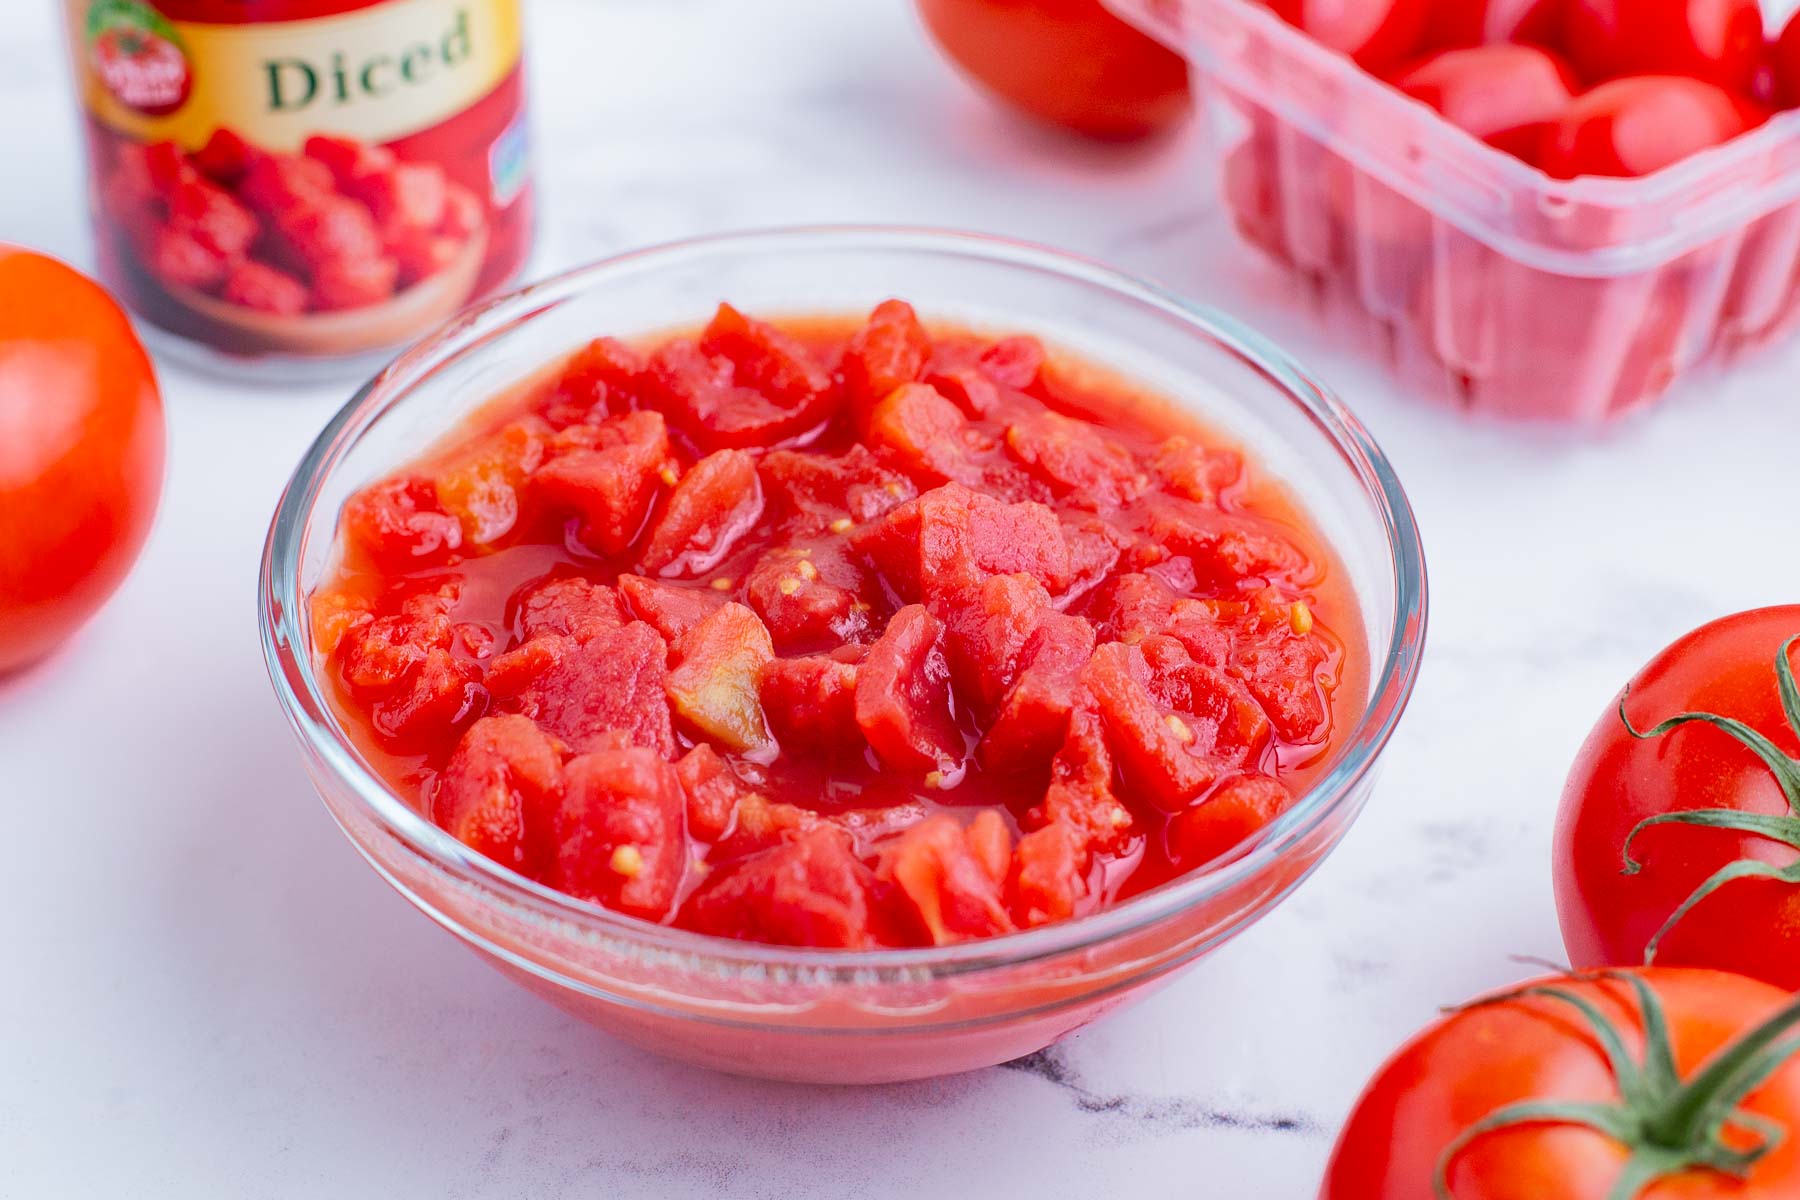 Canned diced tomatoes in a glass bowl with fresh tomatoes nearby.